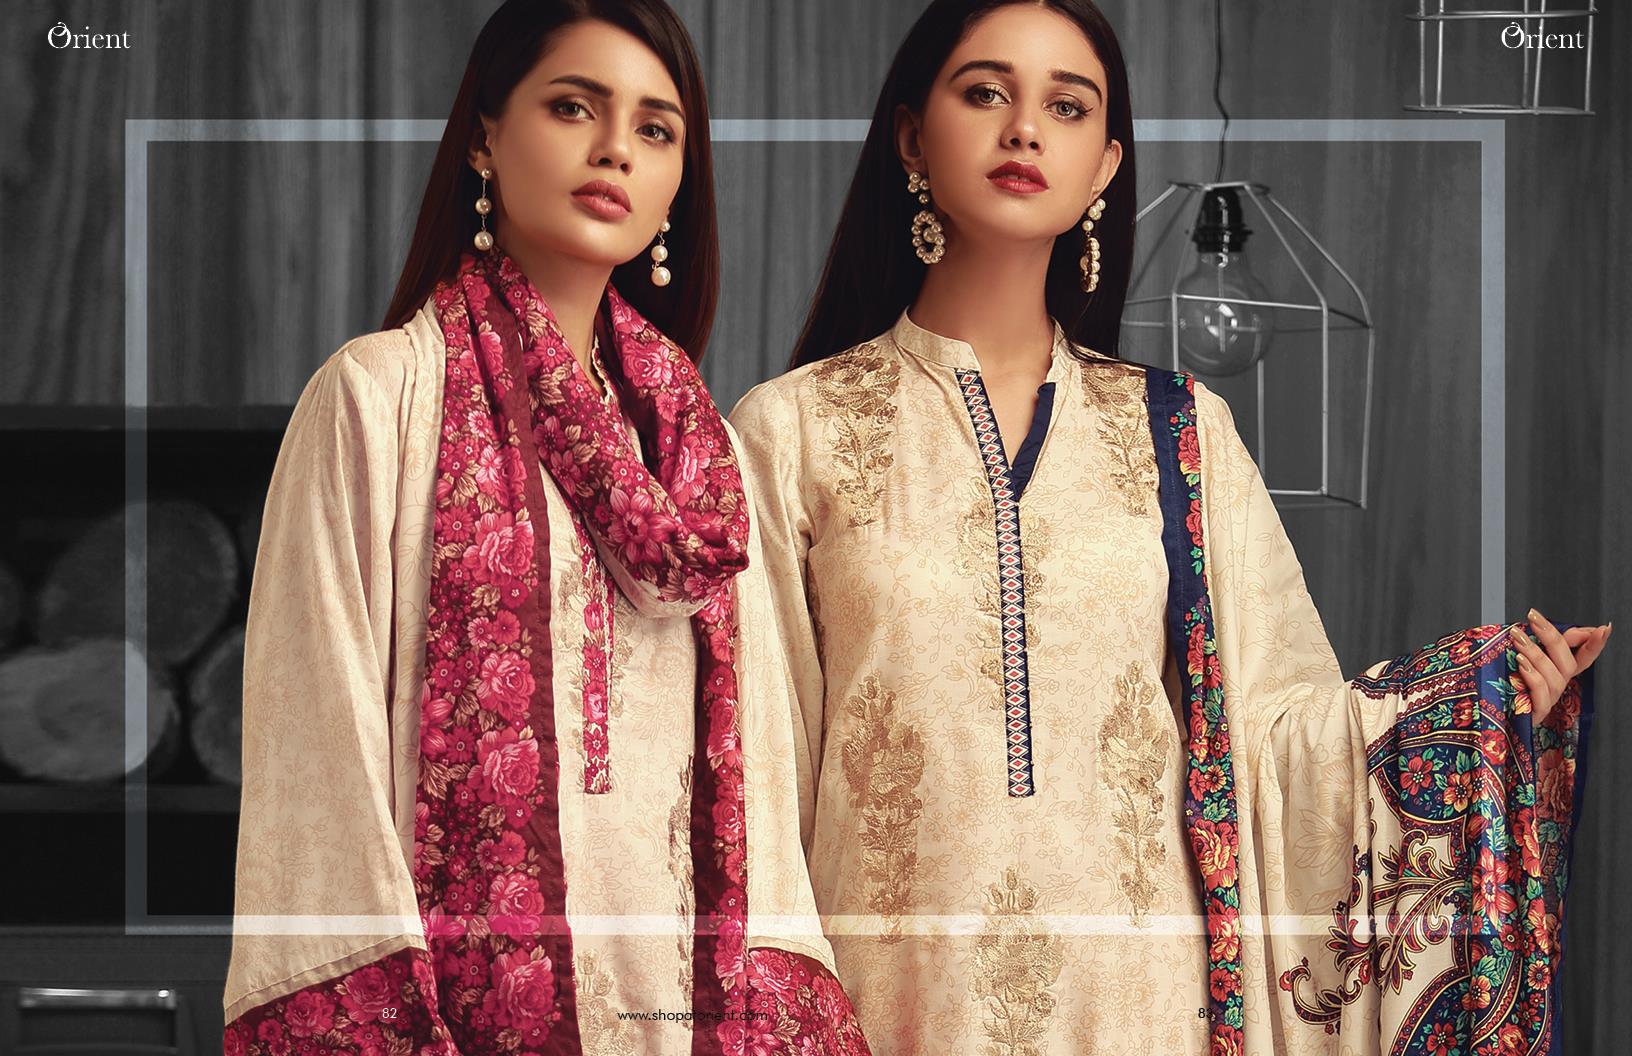 Orient Textiles Latest Winter Collection 2018